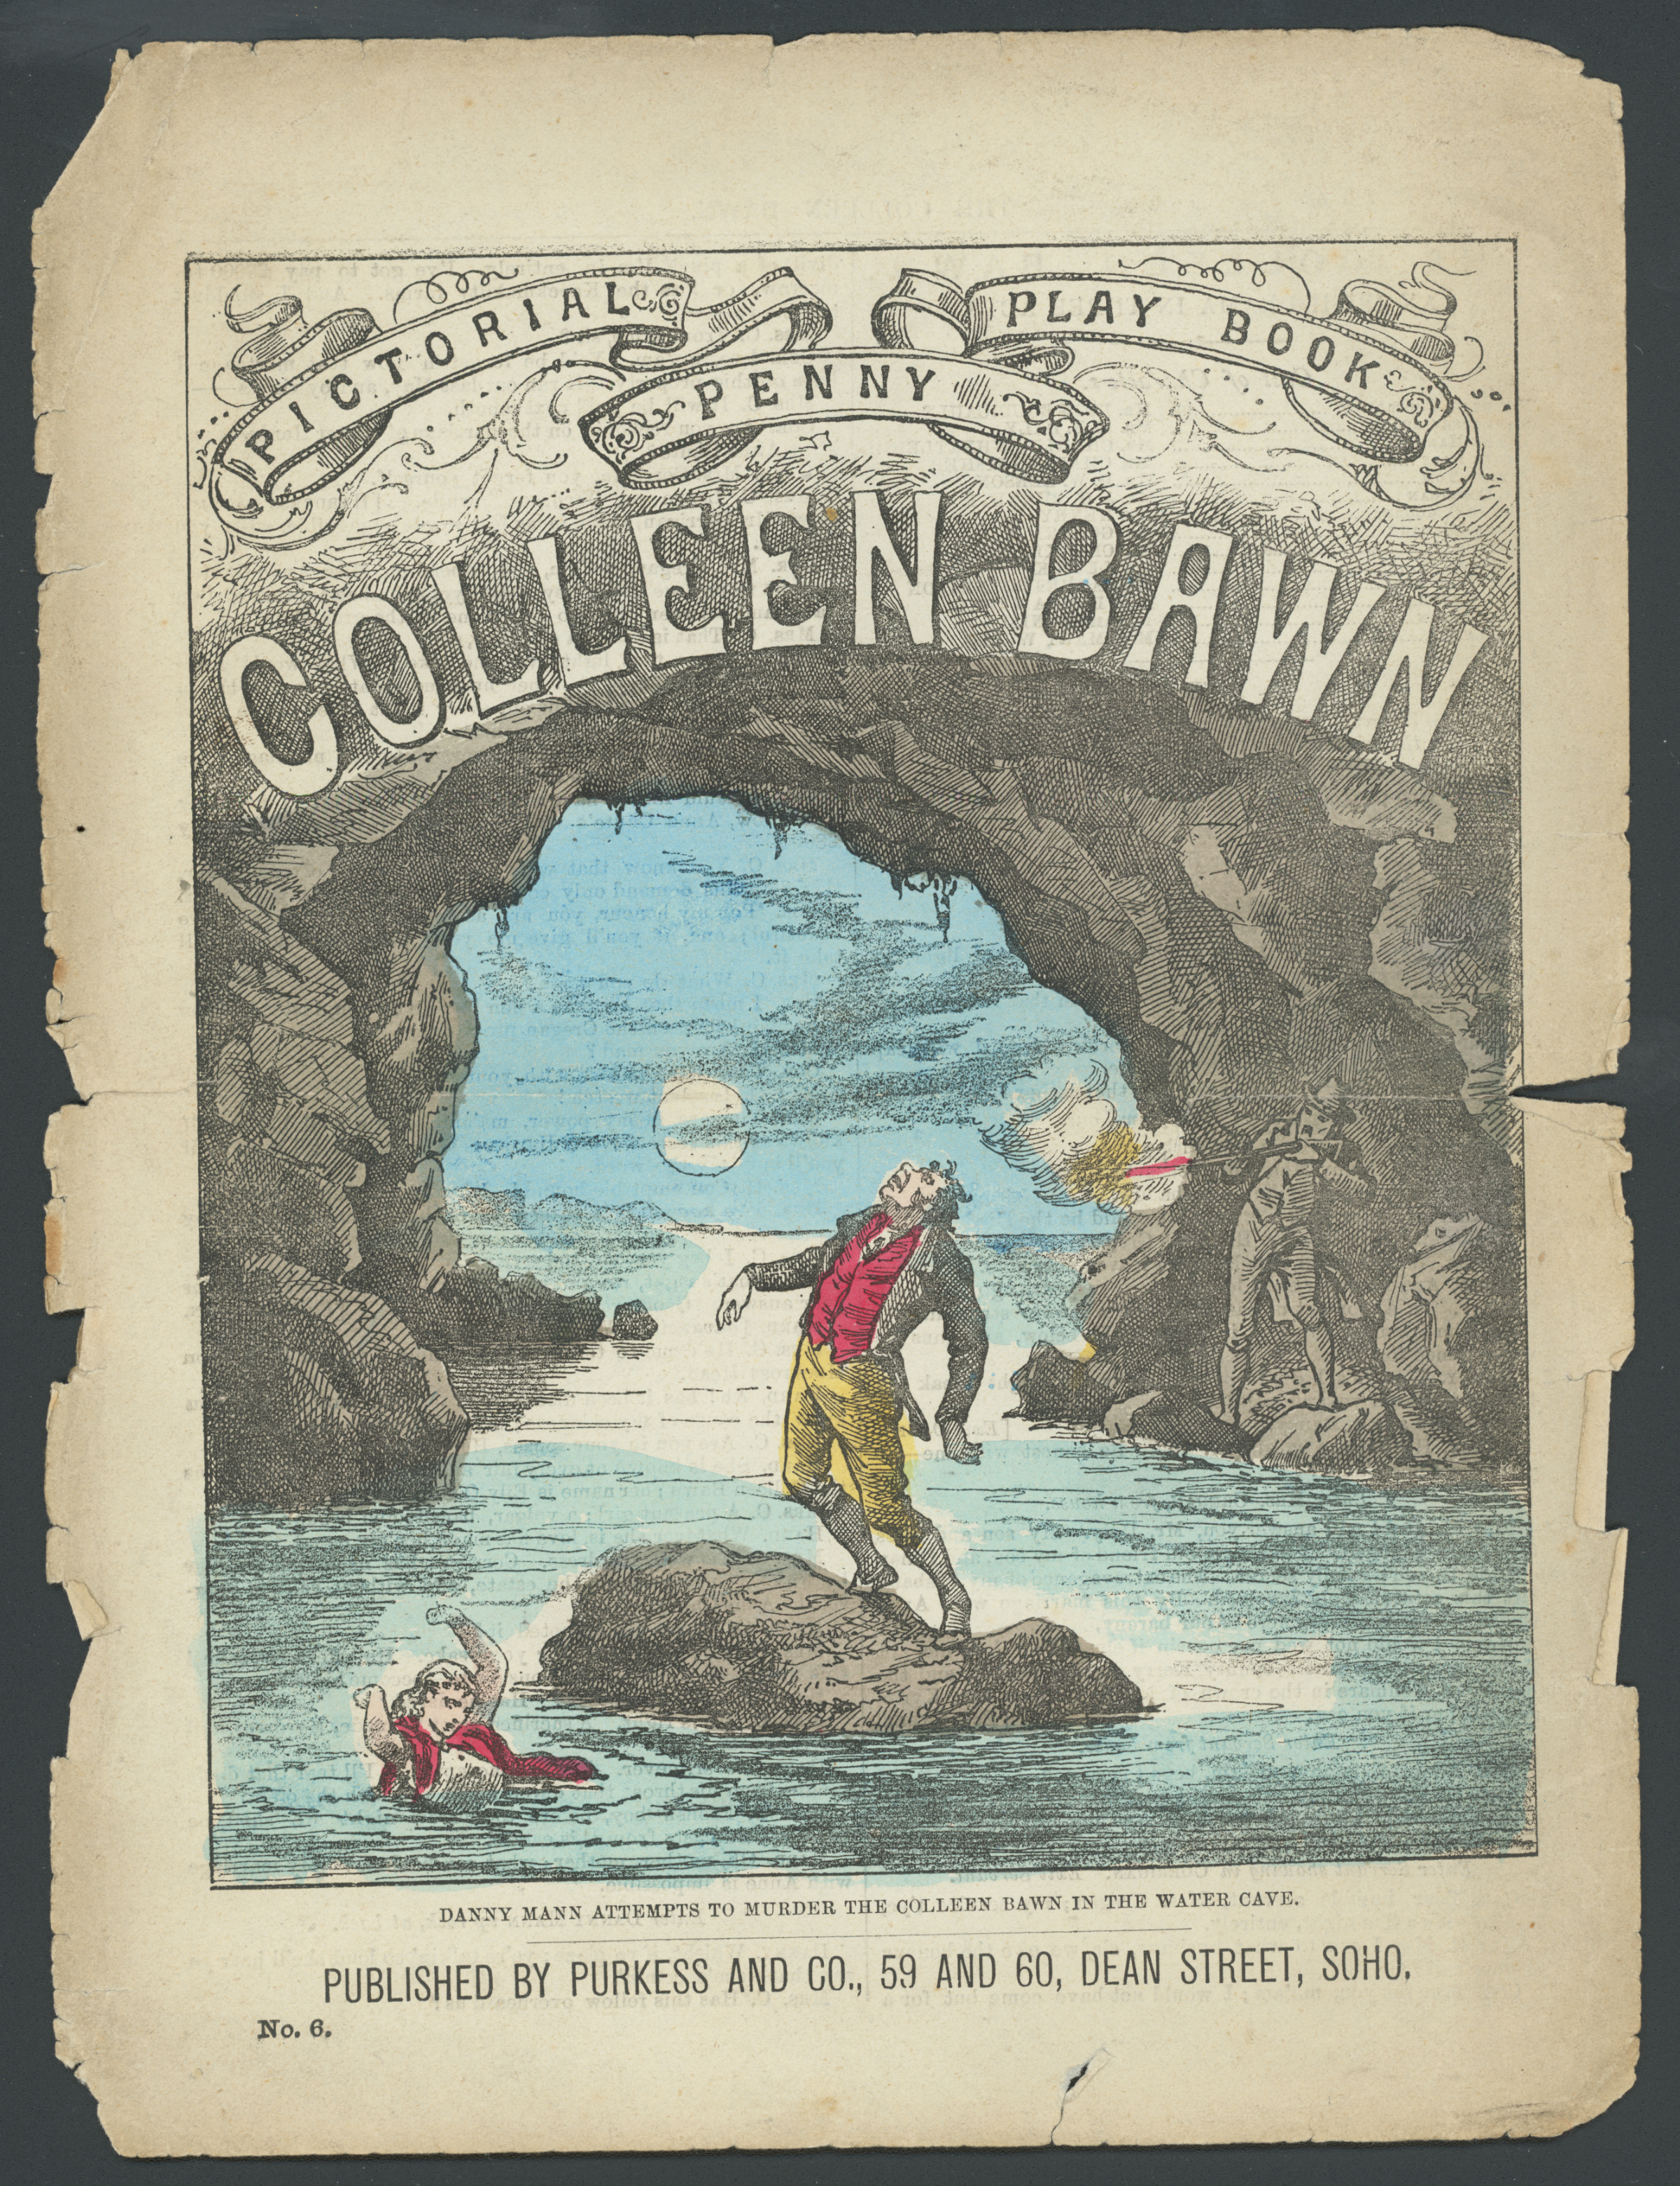 Front cover of a Penny Pictorial Play Book of 'The Colleen Bawn' by Dion Boucicault, featuring a colour illustration of a scene from the play.